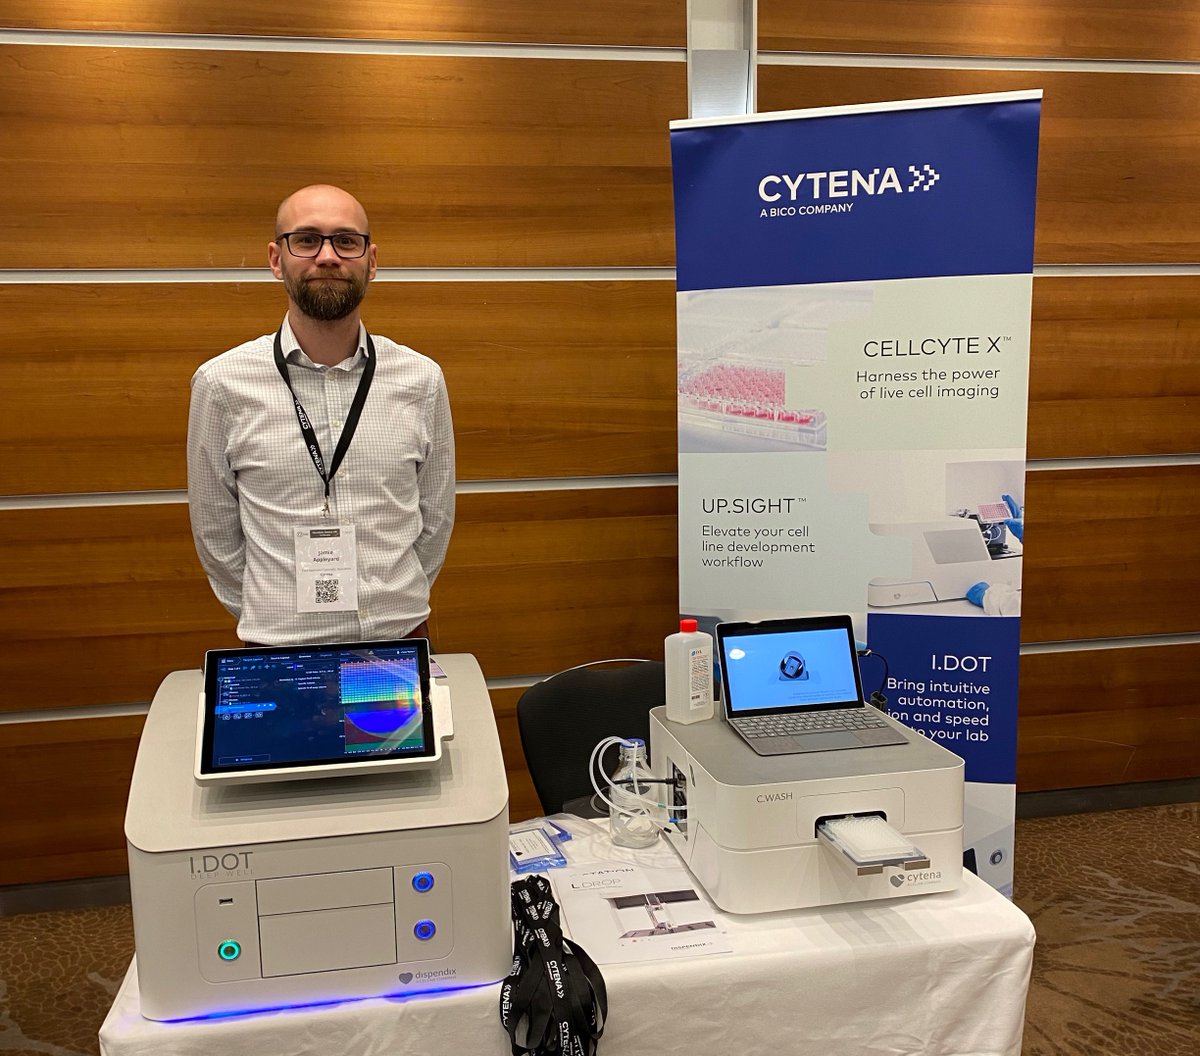 The #OmicsSeries22 in #London has begun! Stop by booth 10 to learn more about how our single-cell dispensing, liquid handling and plate washing technology can optimize your workflows. Spend less time processing and more time discovering! 

#cytena #dispendix #bico